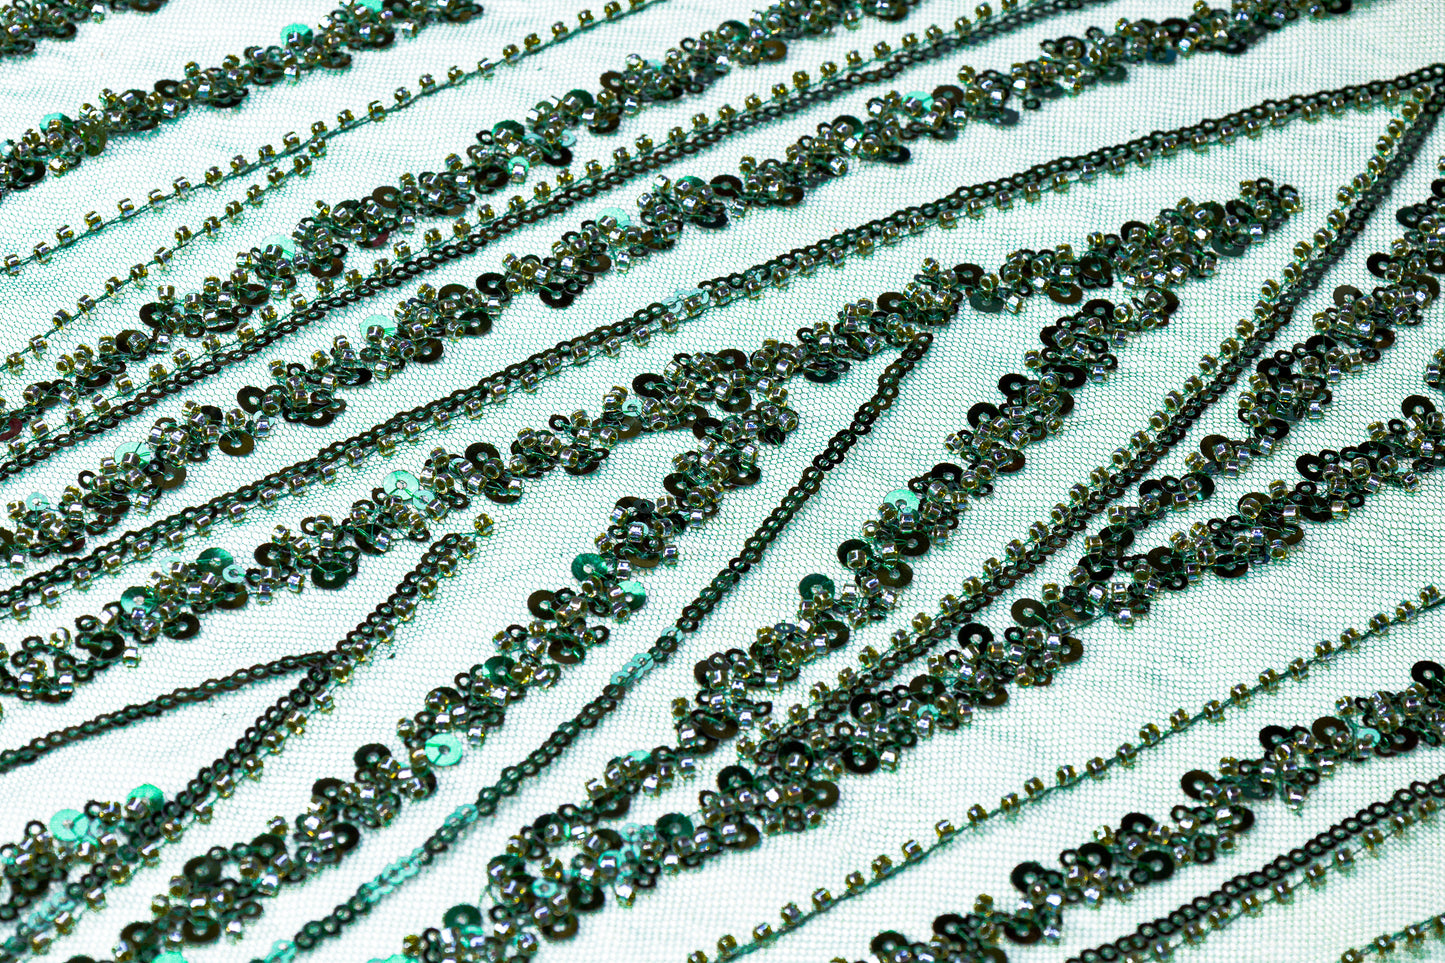 Beaded and Sequined Mesh - Emerald Green